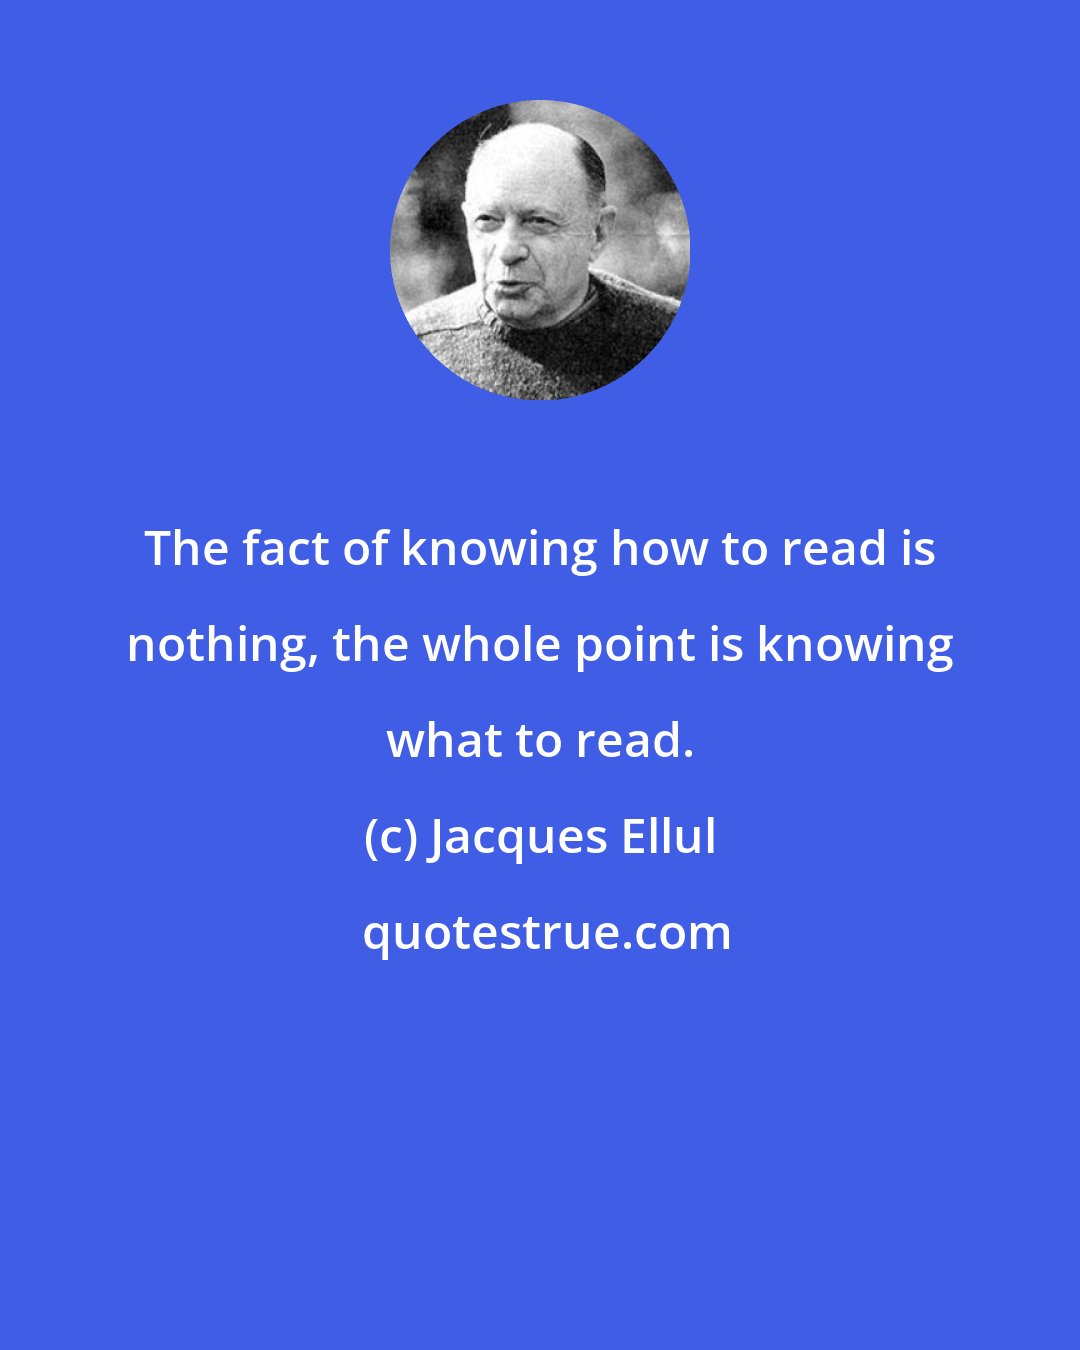 Jacques Ellul: The fact of knowing how to read is nothing, the whole point is knowing what to read.